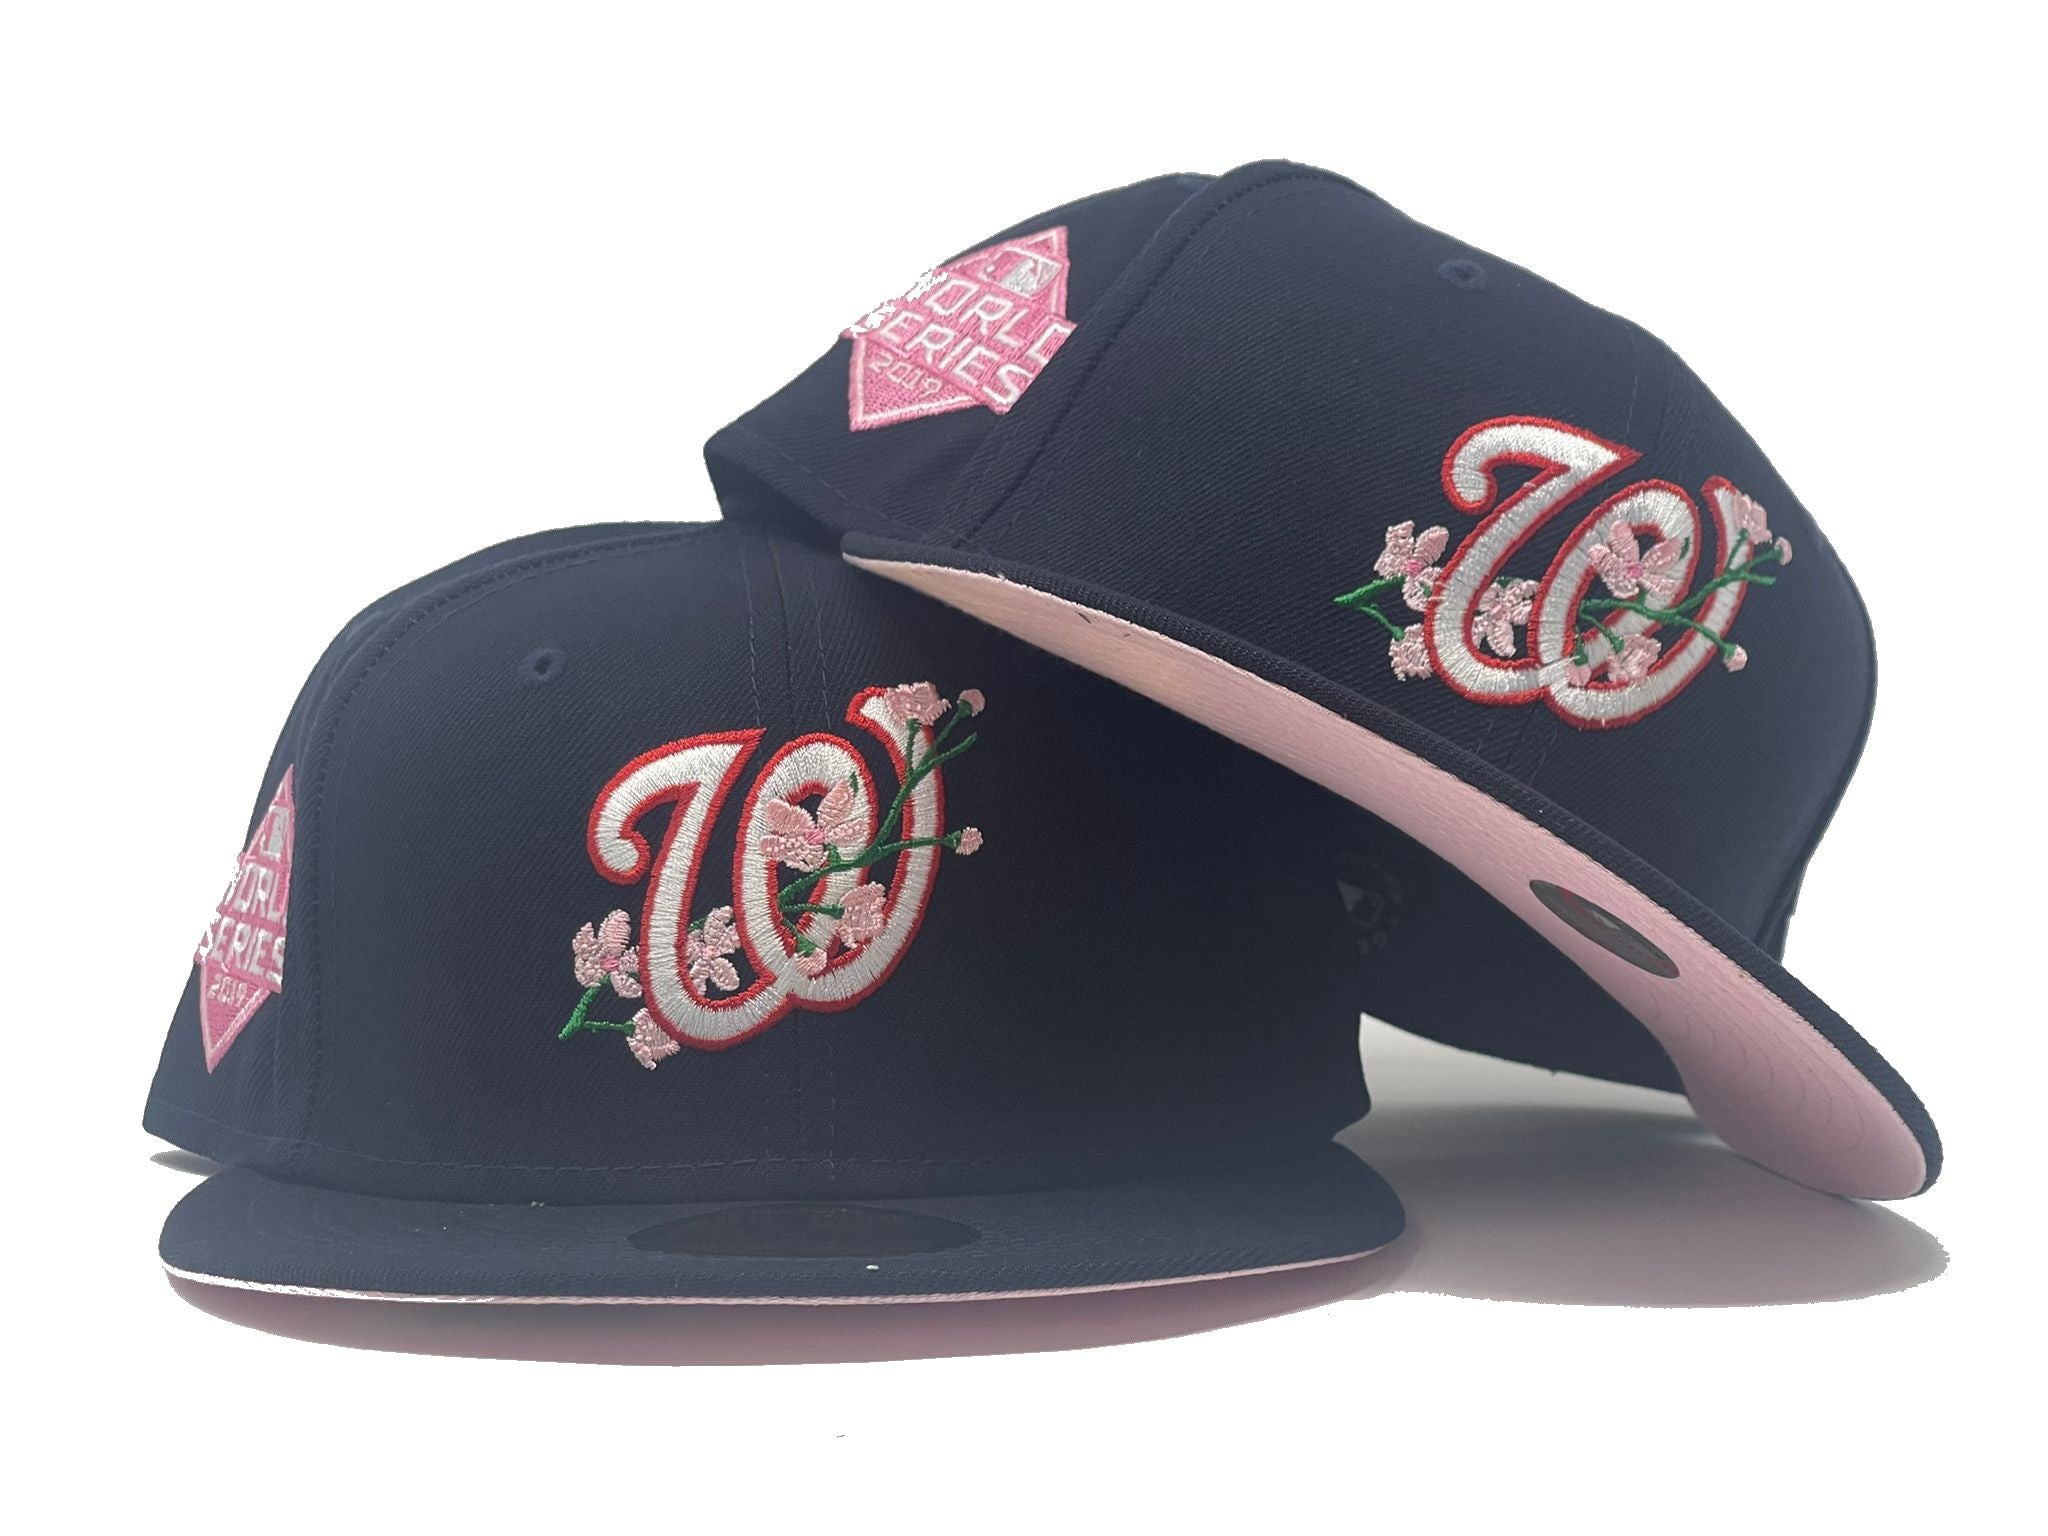 Atlanta Braves SIDE-BLOOM Navy Fitted Hat by New Era